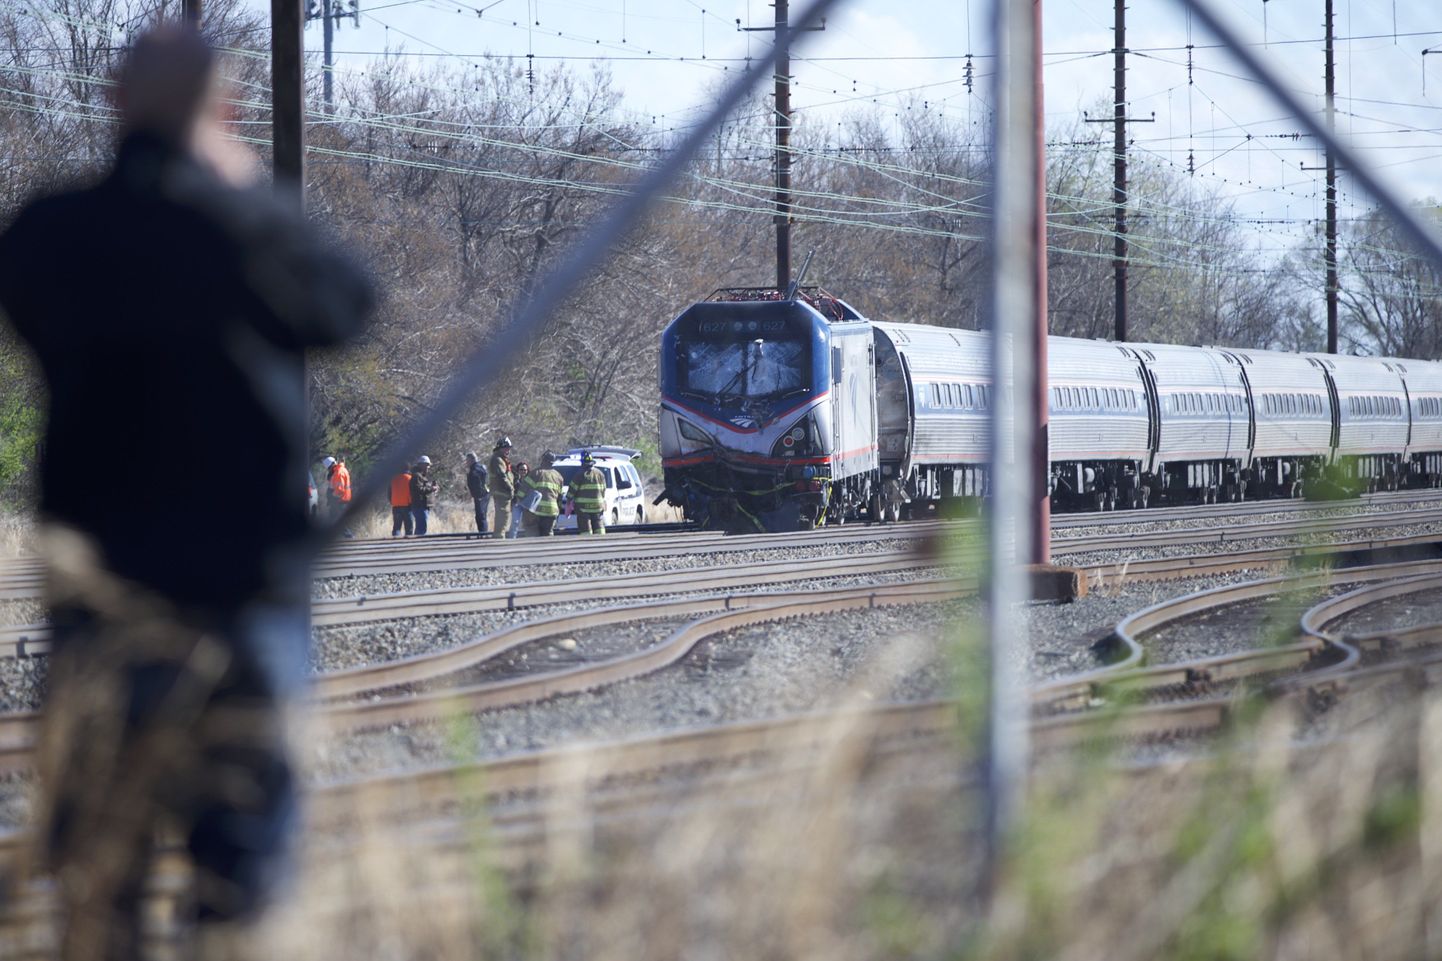 CHESTER, PA - APRIL 3: A man observes the crash site of Amtrak Palmetto train 89 on April 3, 2016 in Chester, Pennsylvania. Two people are confirmed dead after the lead engine of the train struck a backhoe that was on the track sourth of Philadelphia, according to published reports. Approximately 341 passengers and seven crew members were onboard the train, which was traveling from New York to Savannah, according to Amtrak.   Mark Makela/Getty Images/AFP
== FOR NEWSPAPERS, INTERNET, TELCOS & TELEVISION USE ONLY ==